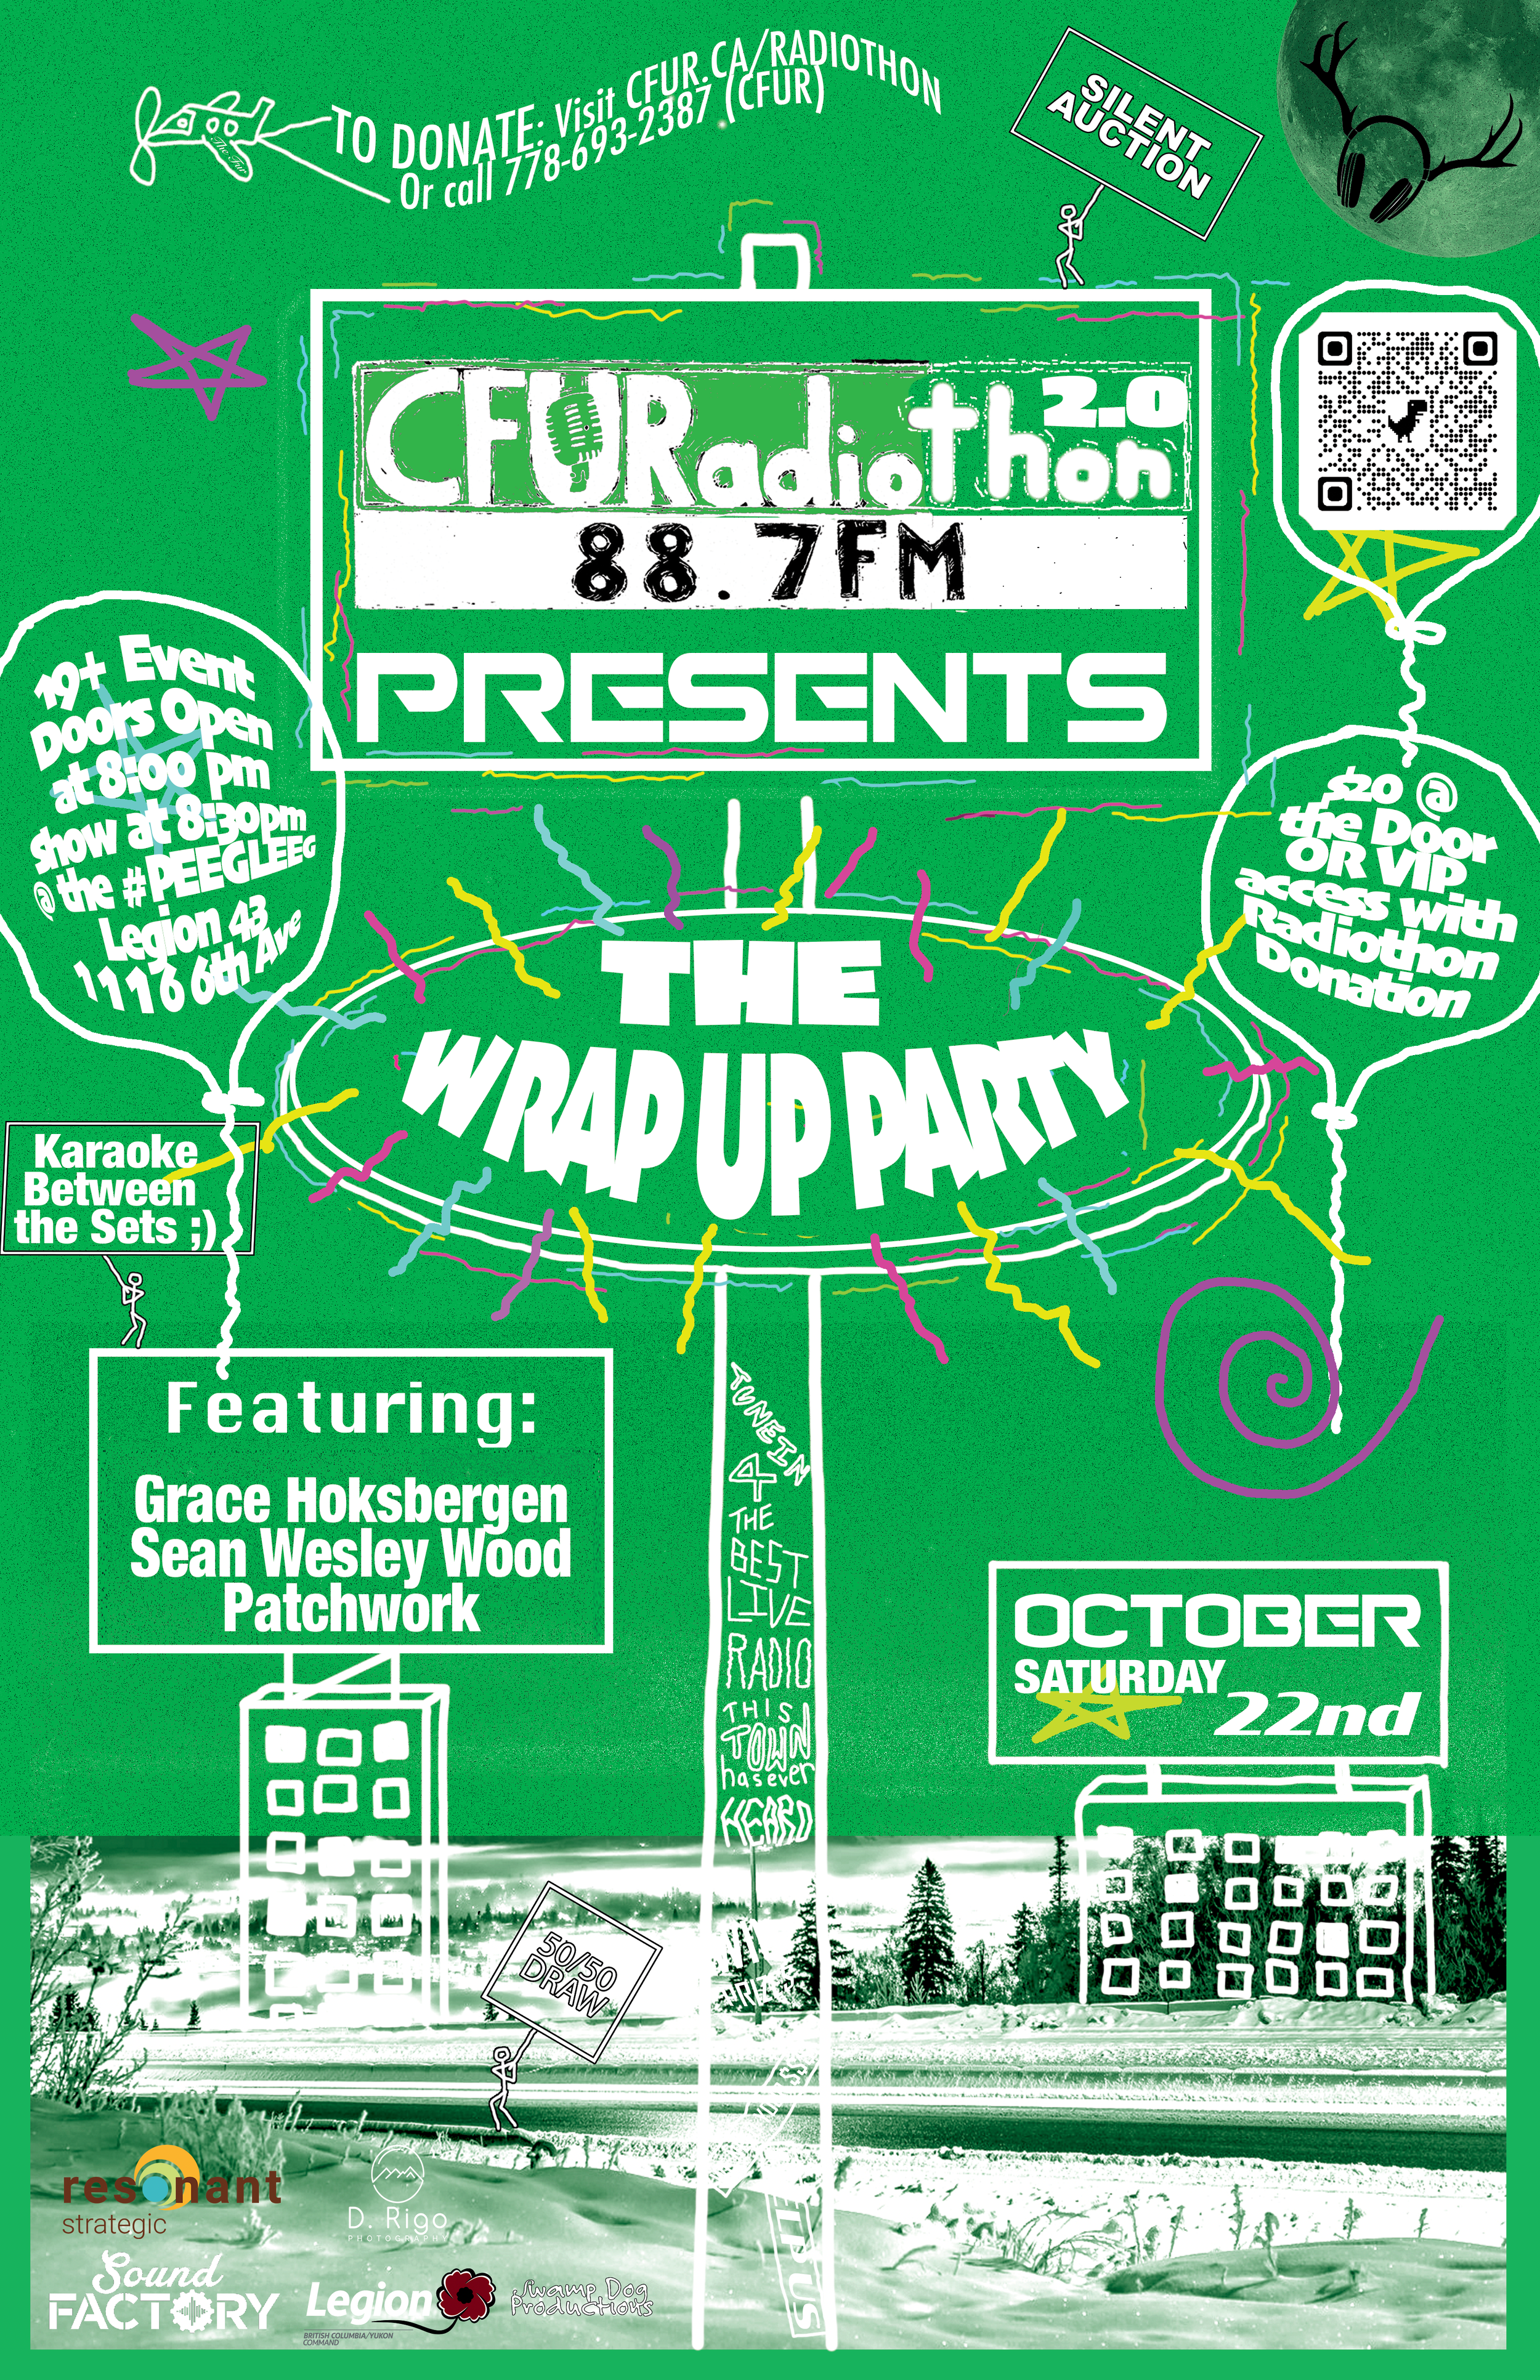 Final - Radiothon - Wrap Up Party Poster Green - Portrait - with sign + objects October 20th.png